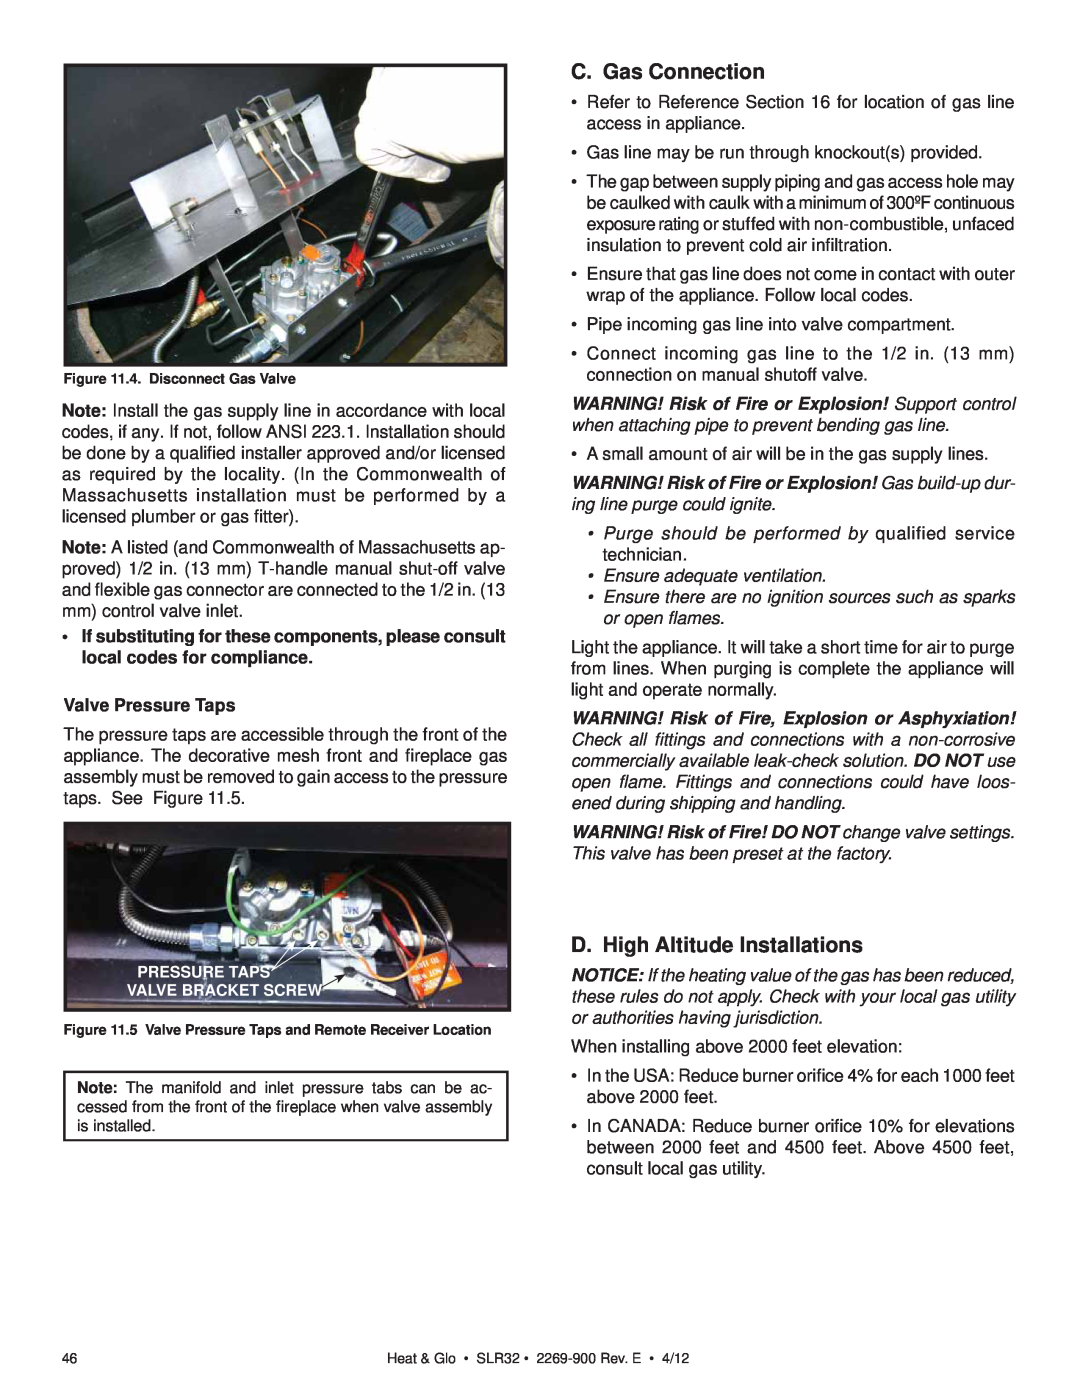 Heat & Glo LifeStyle SLR32 owner manual C. Gas Connection, D. High Altitude Installations, Valve Pressure Taps 